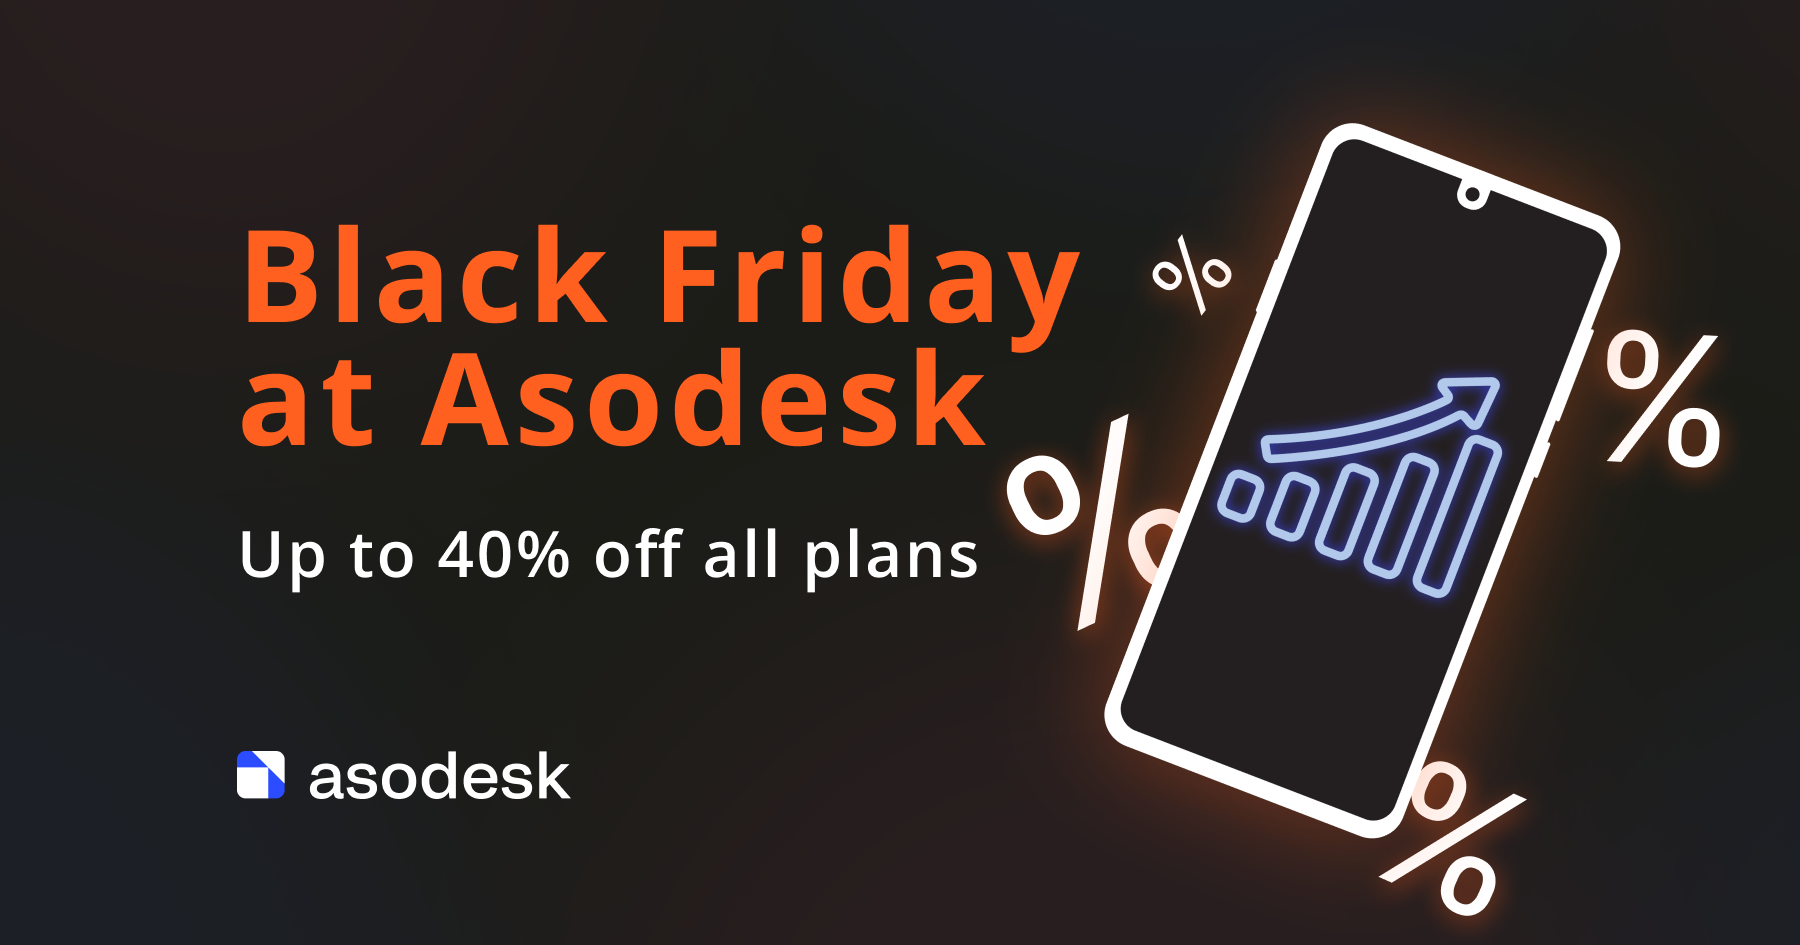 Black Friday at Asodesk: up to 40% off all plans